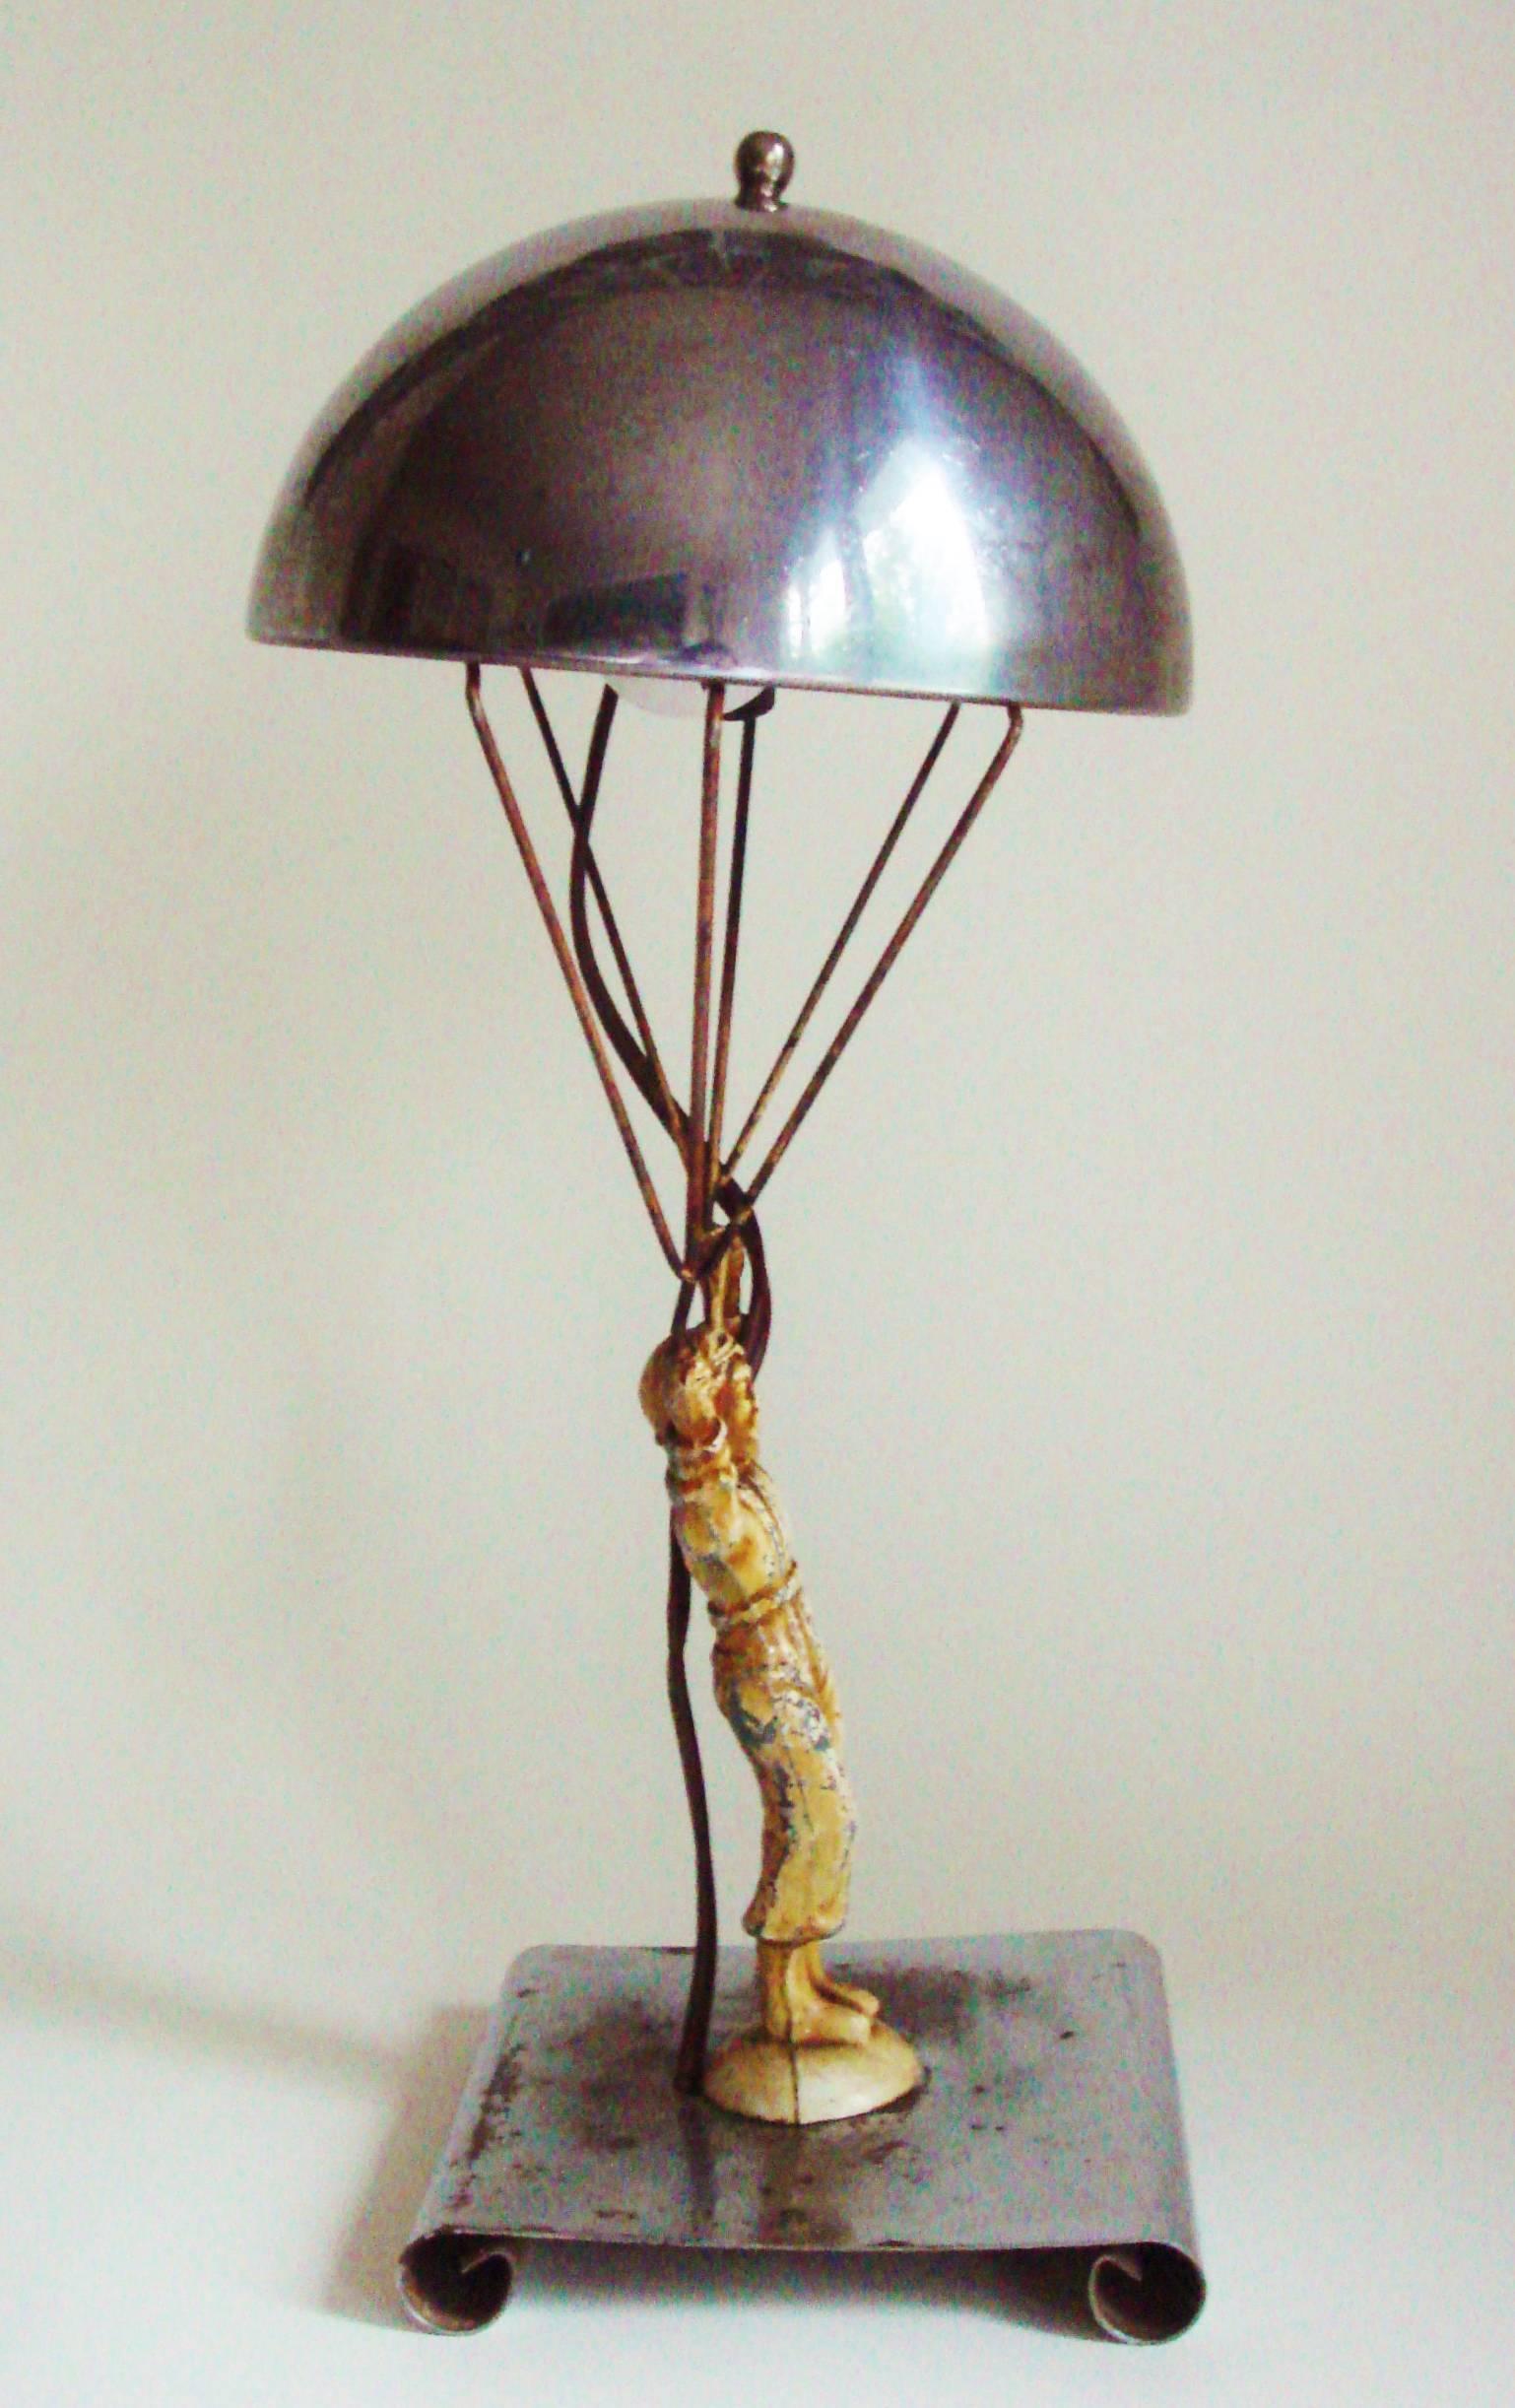 Unrestored American Art Deco Chrome and Painted Novelty Parachute Jumper Lamp For Sale 1